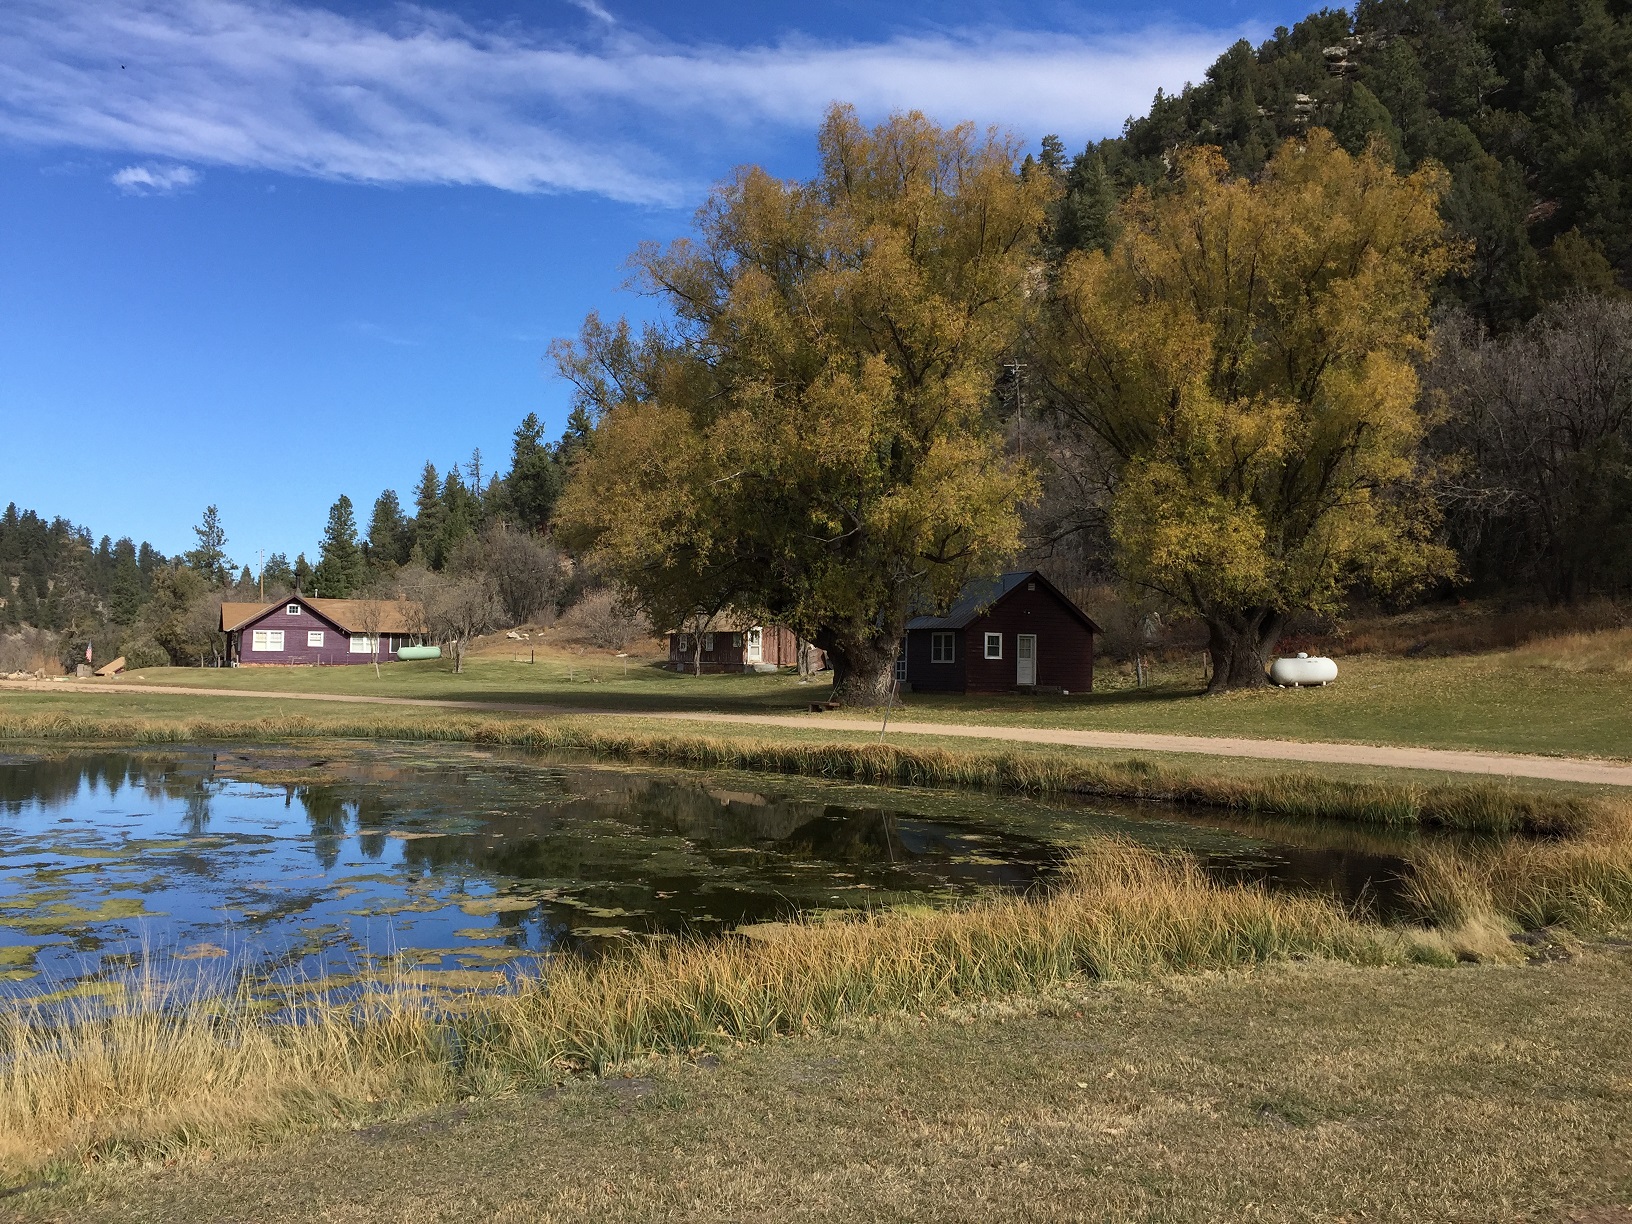 The pond and three buildings at the Big Springs Rental Cabins